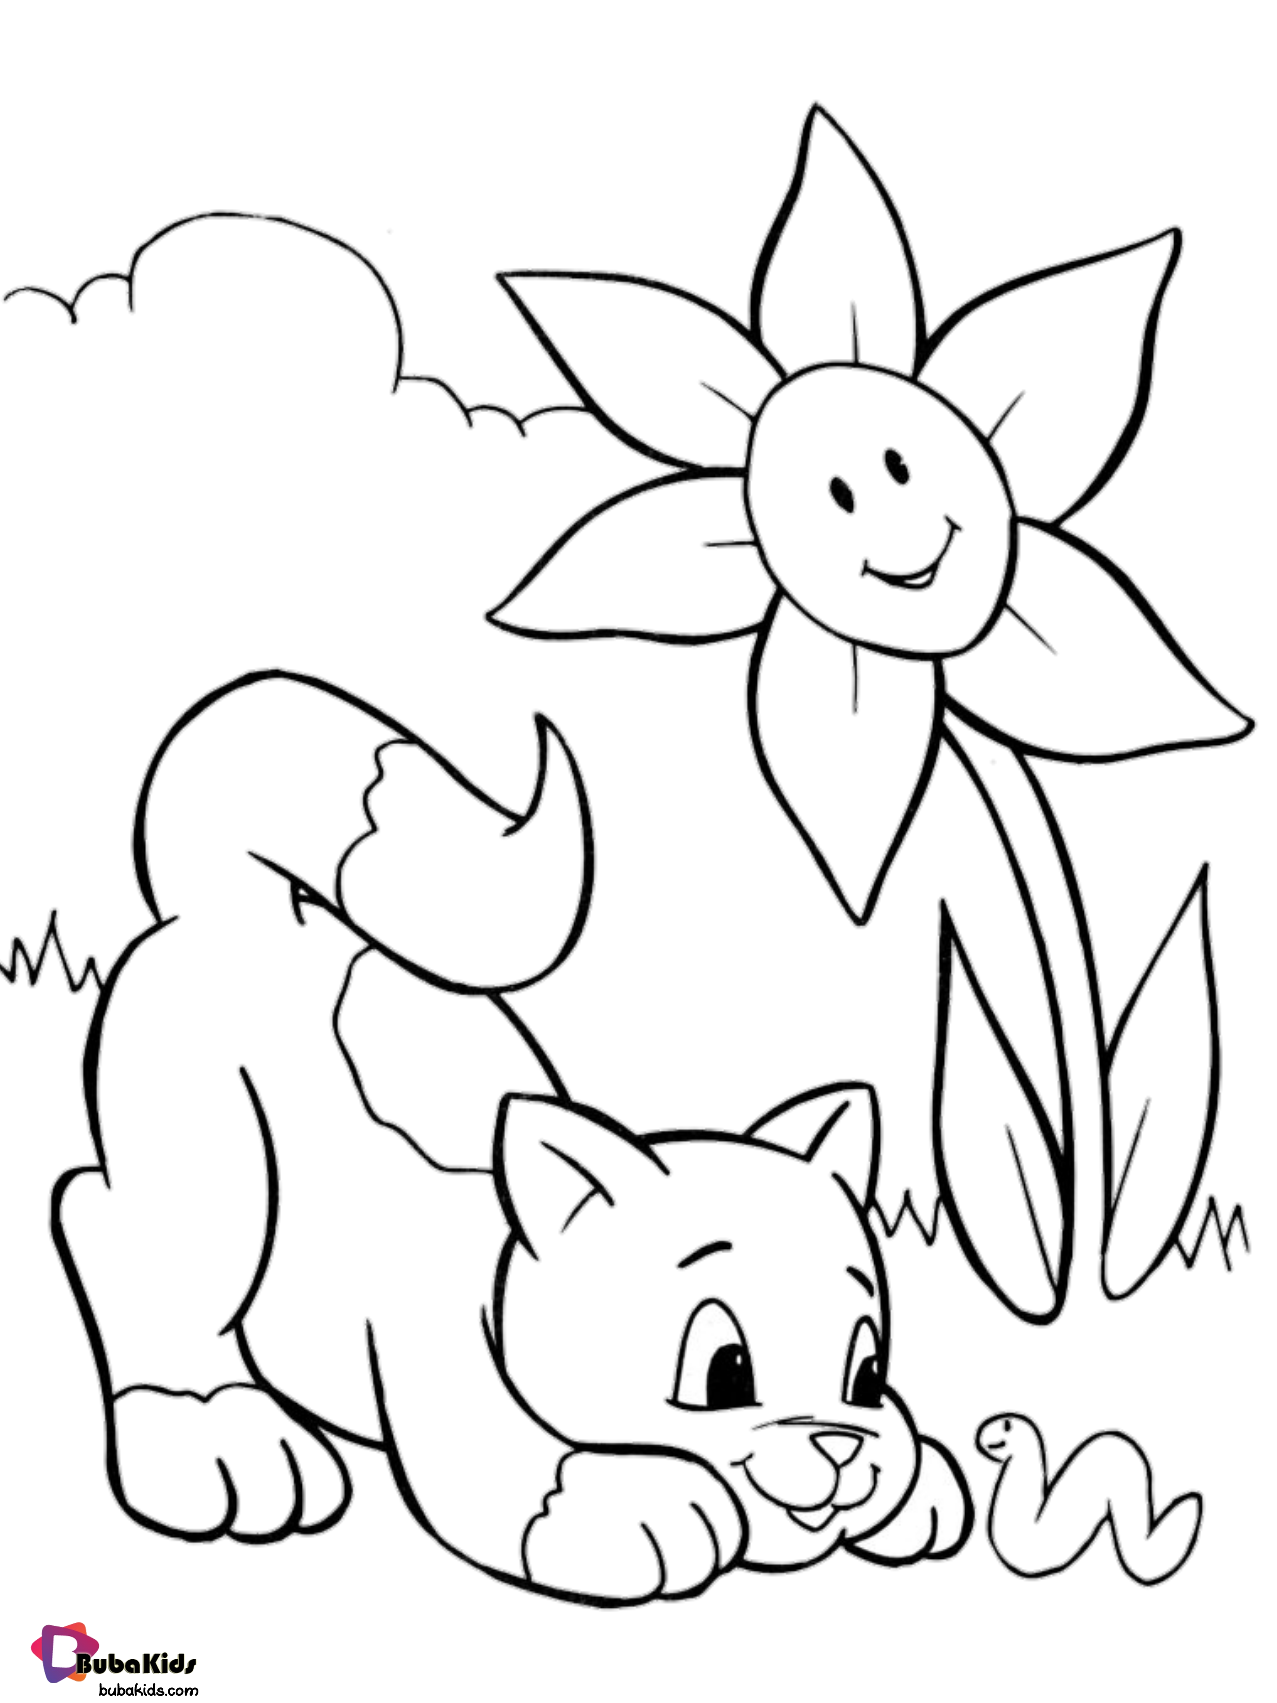 Simple and easy coloring page for toddlers